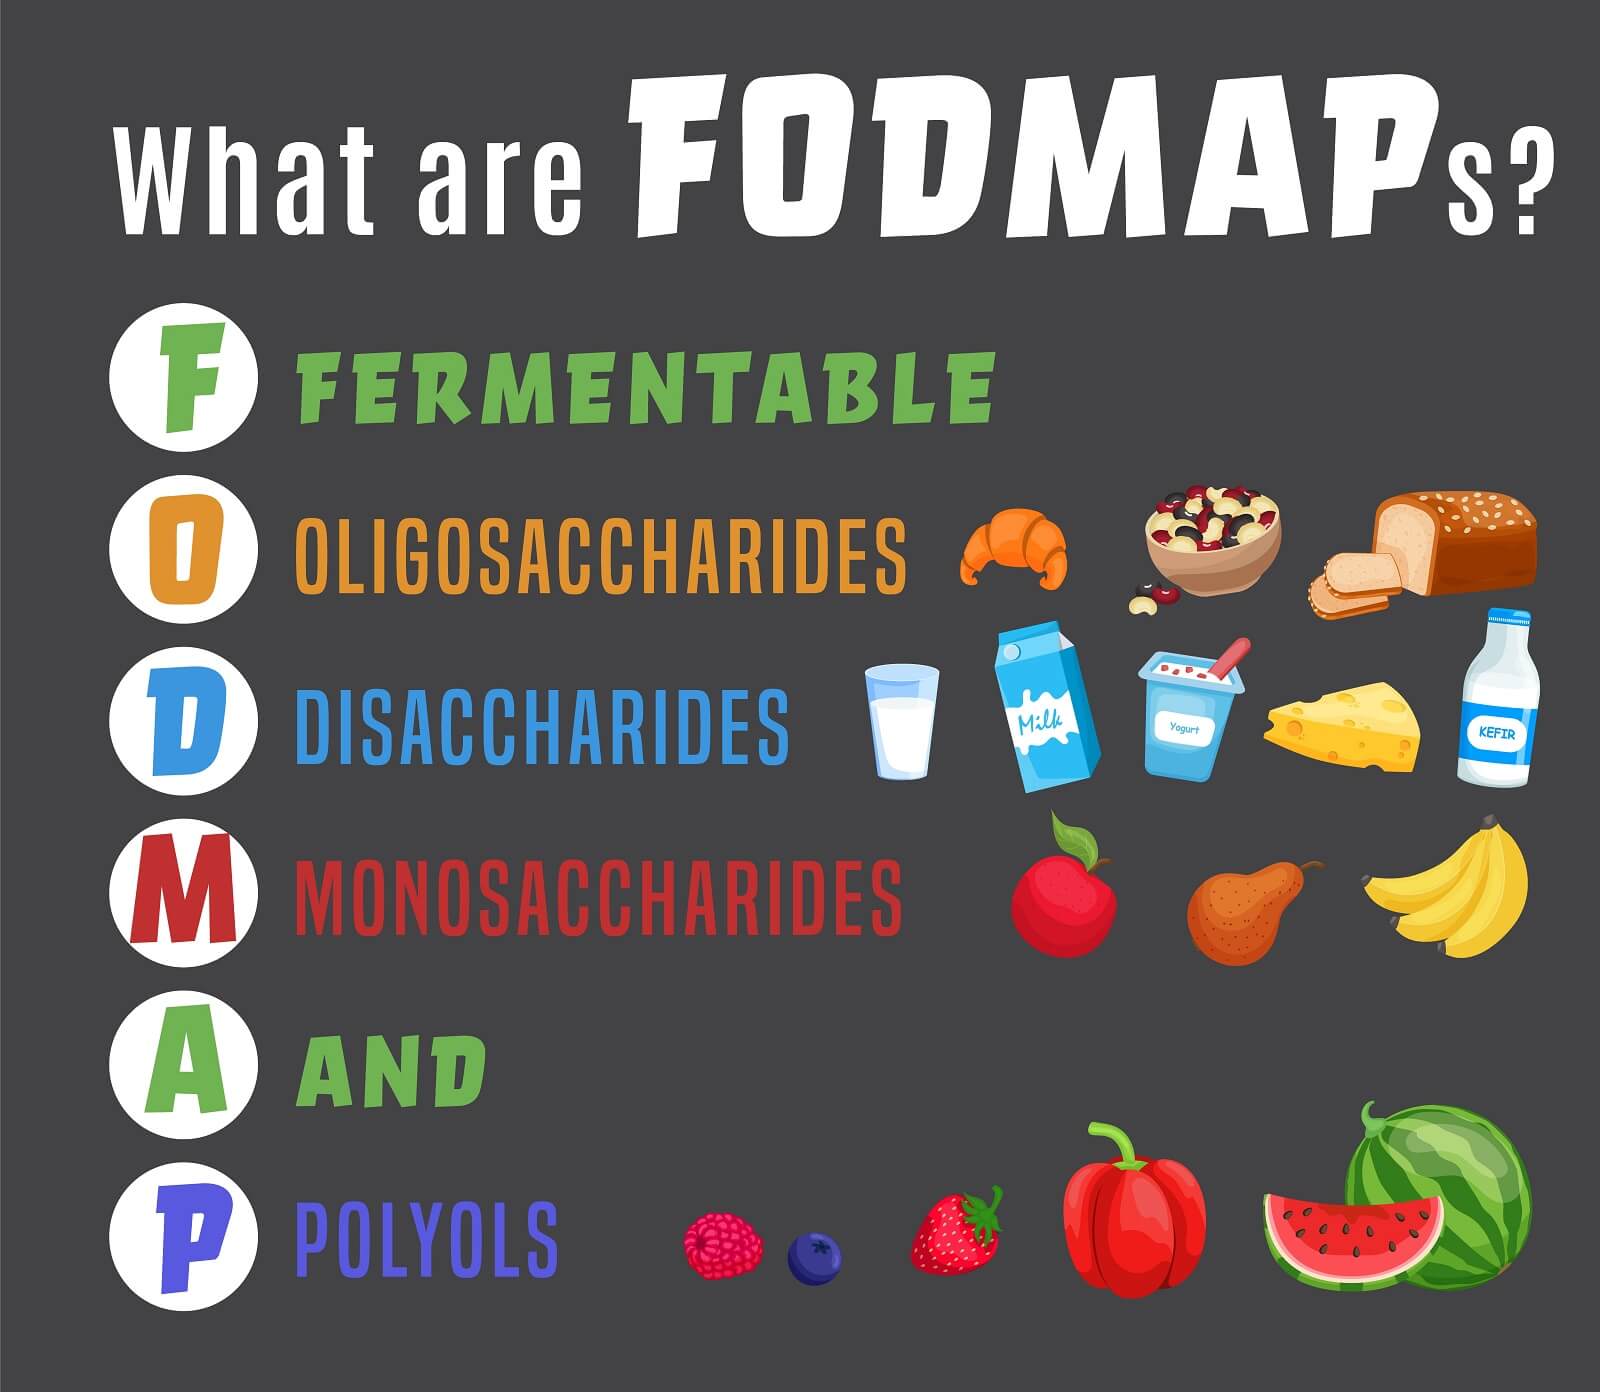 What are high FODMAP (fermentable oligosaccharides, disaccharides, monosaccharides and polyols) foods Infographic.